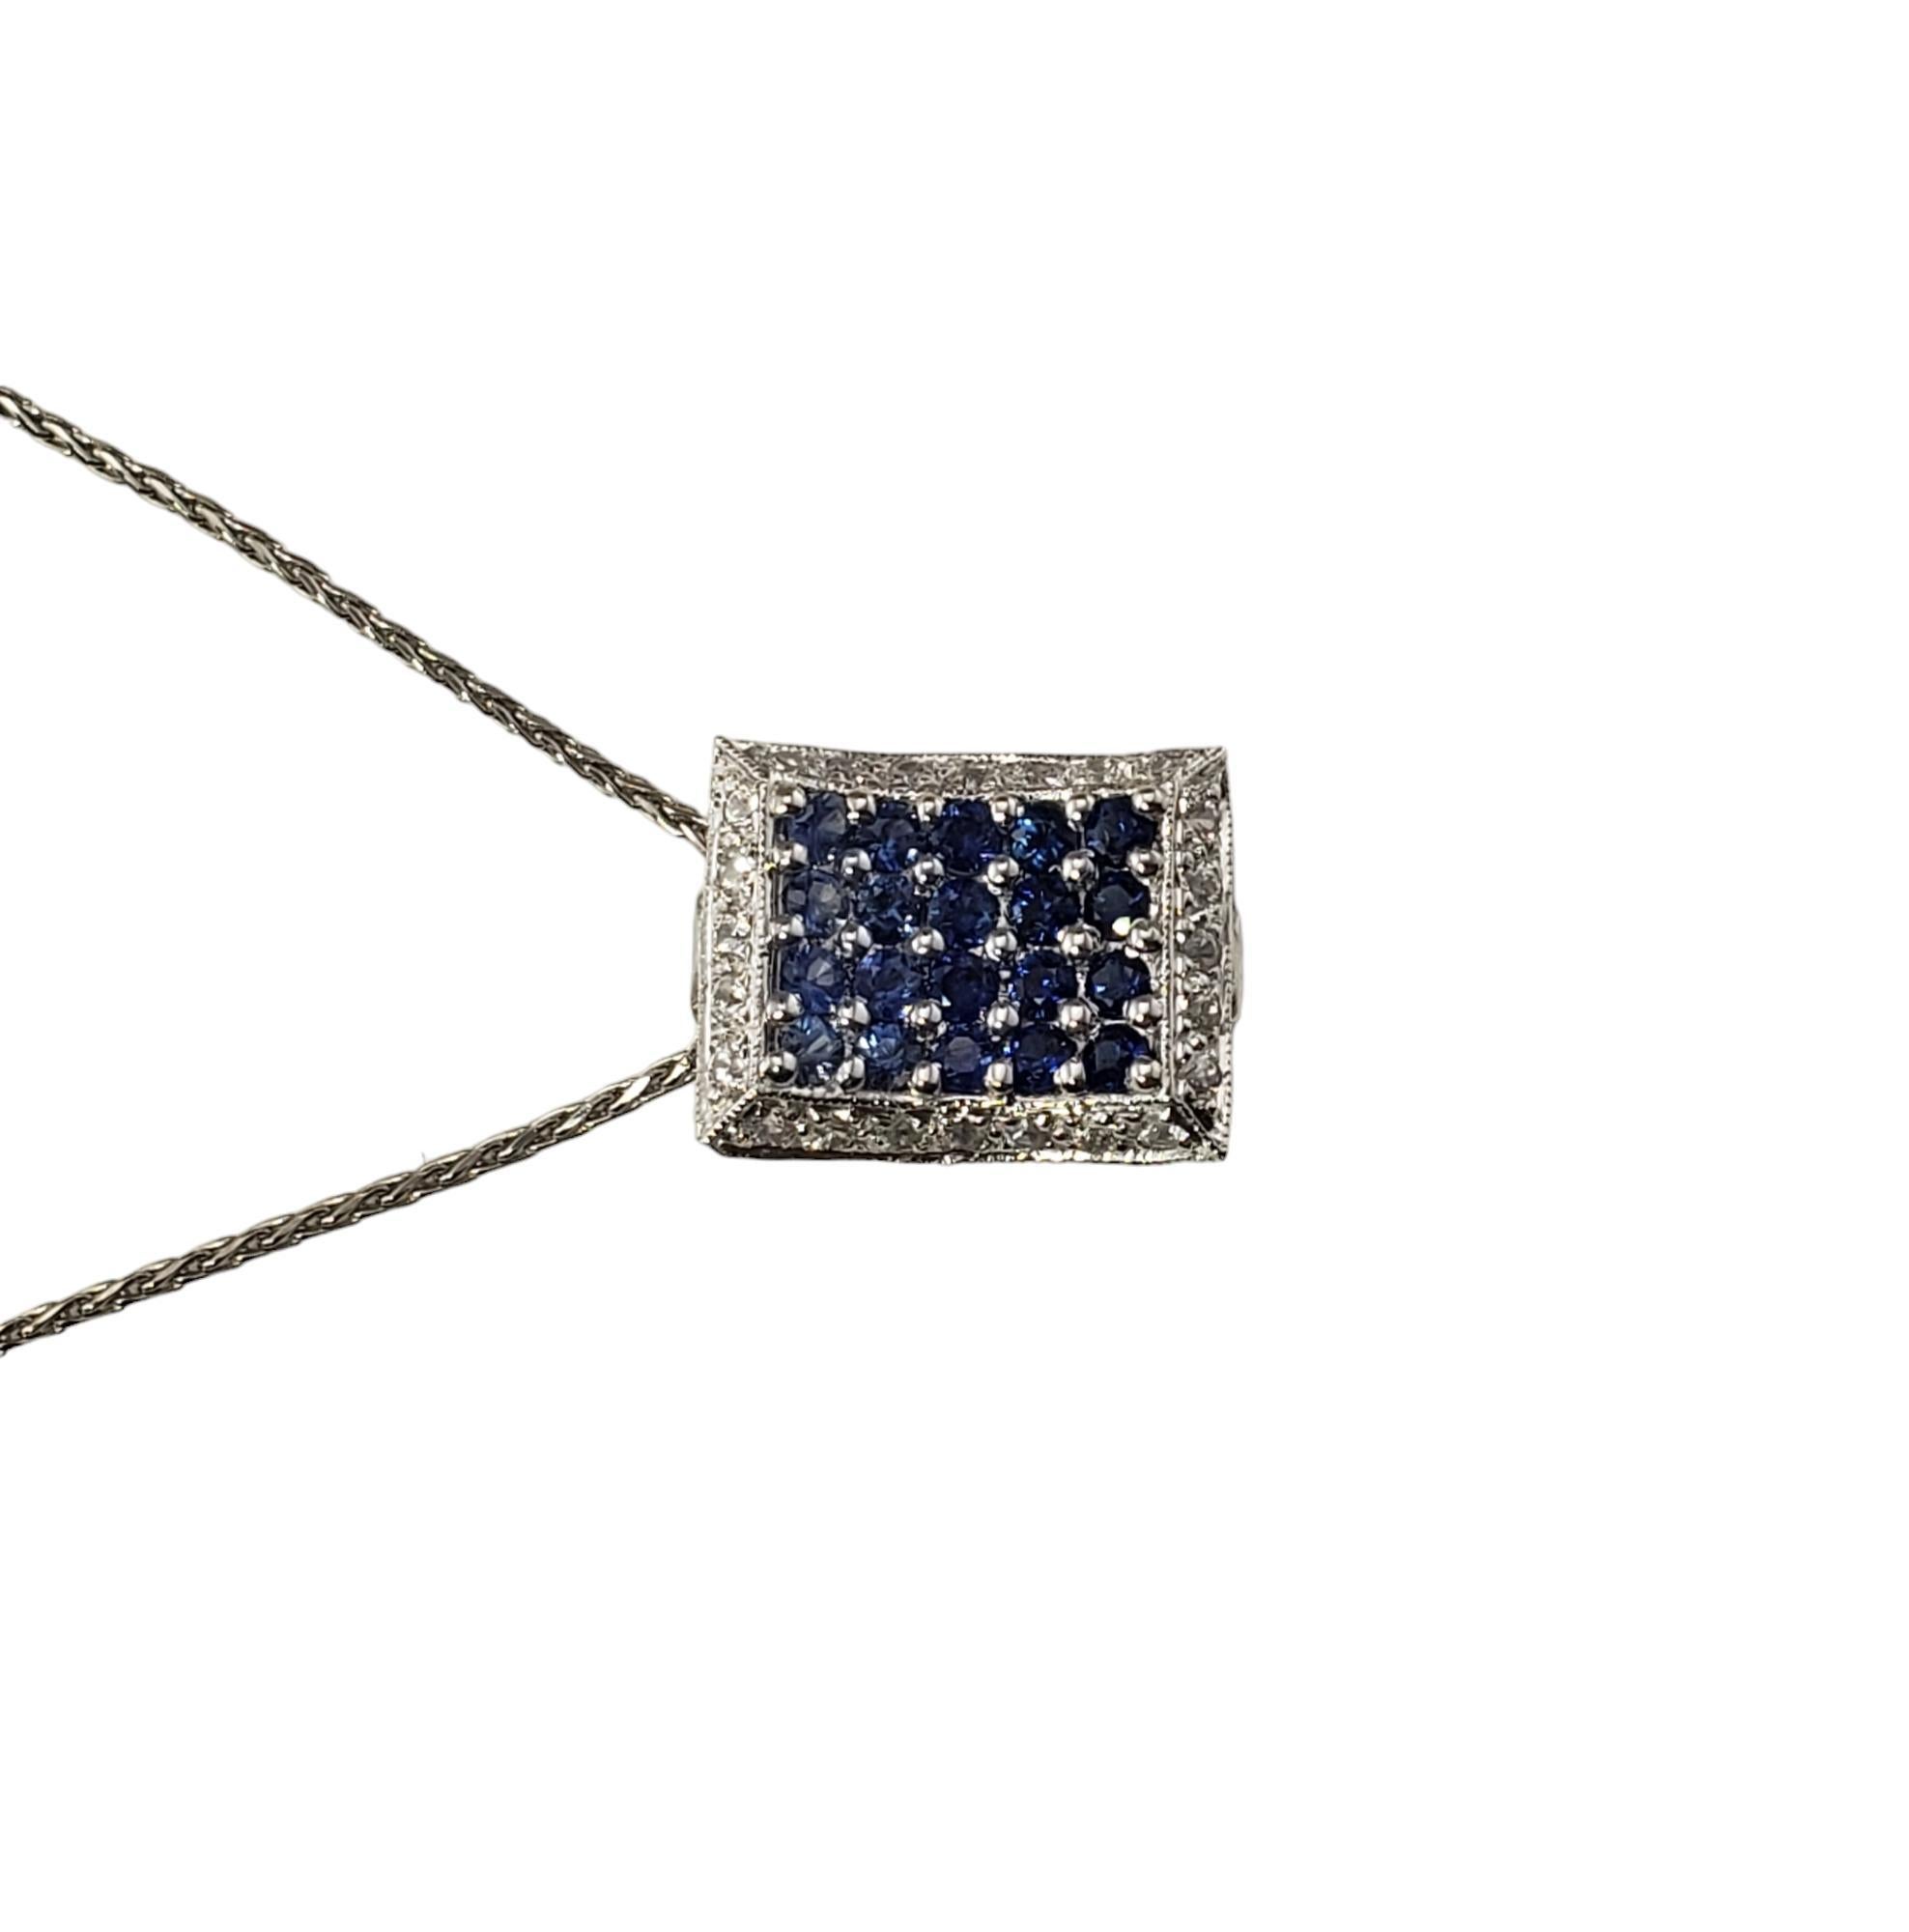  14K WG Blue and White Sapphire Pendant Necklace #15573 In Good Condition For Sale In Washington Depot, CT